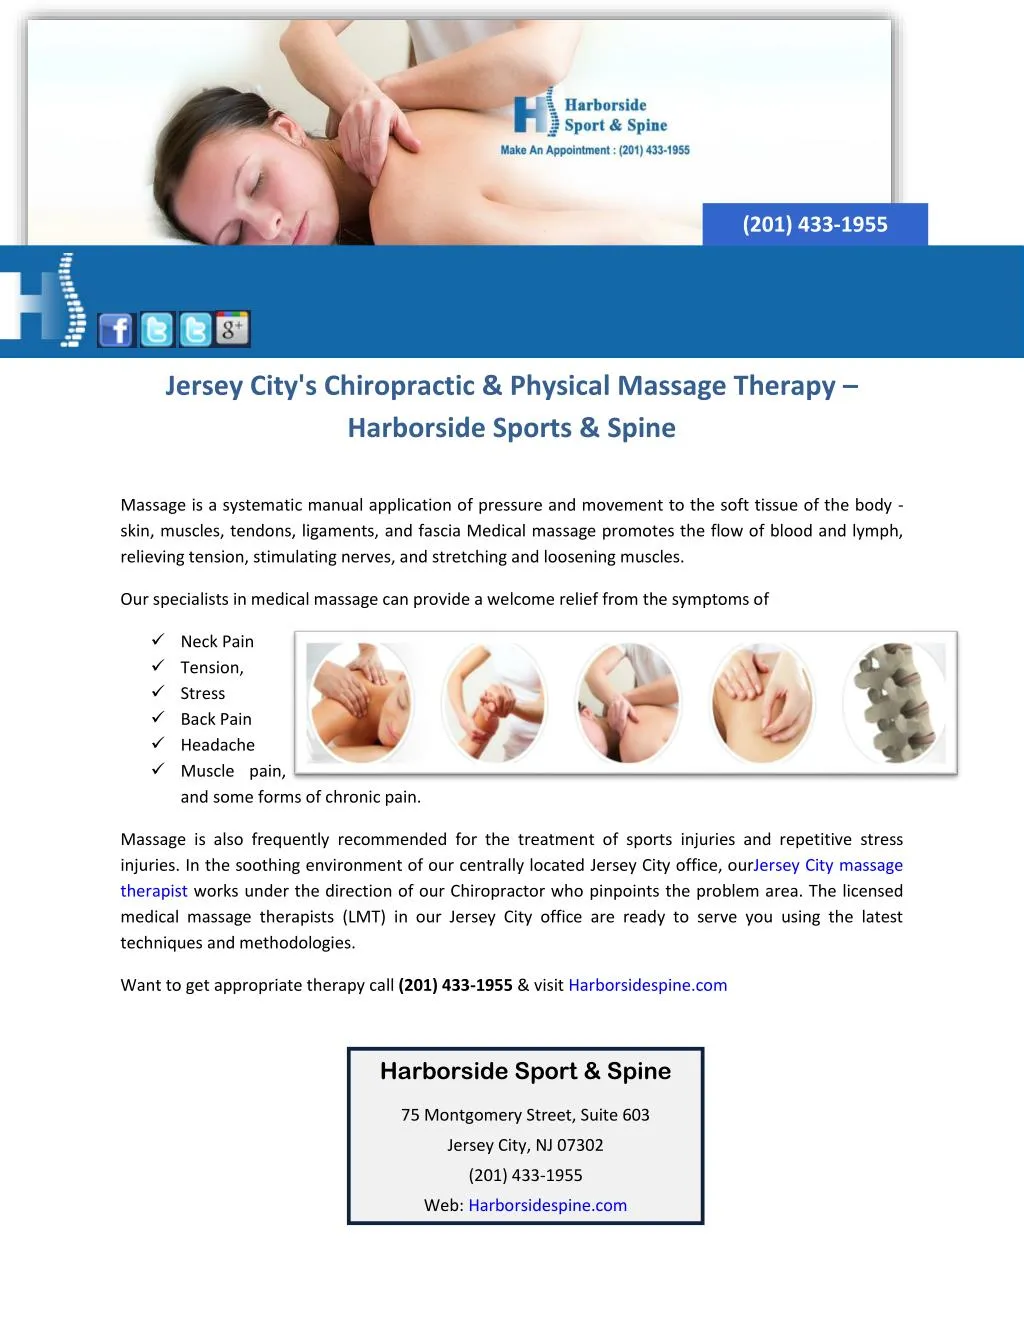 Ppt Jersey Citys Chiropractic And Physical Massage Therapy Harborside Sports And Spine 